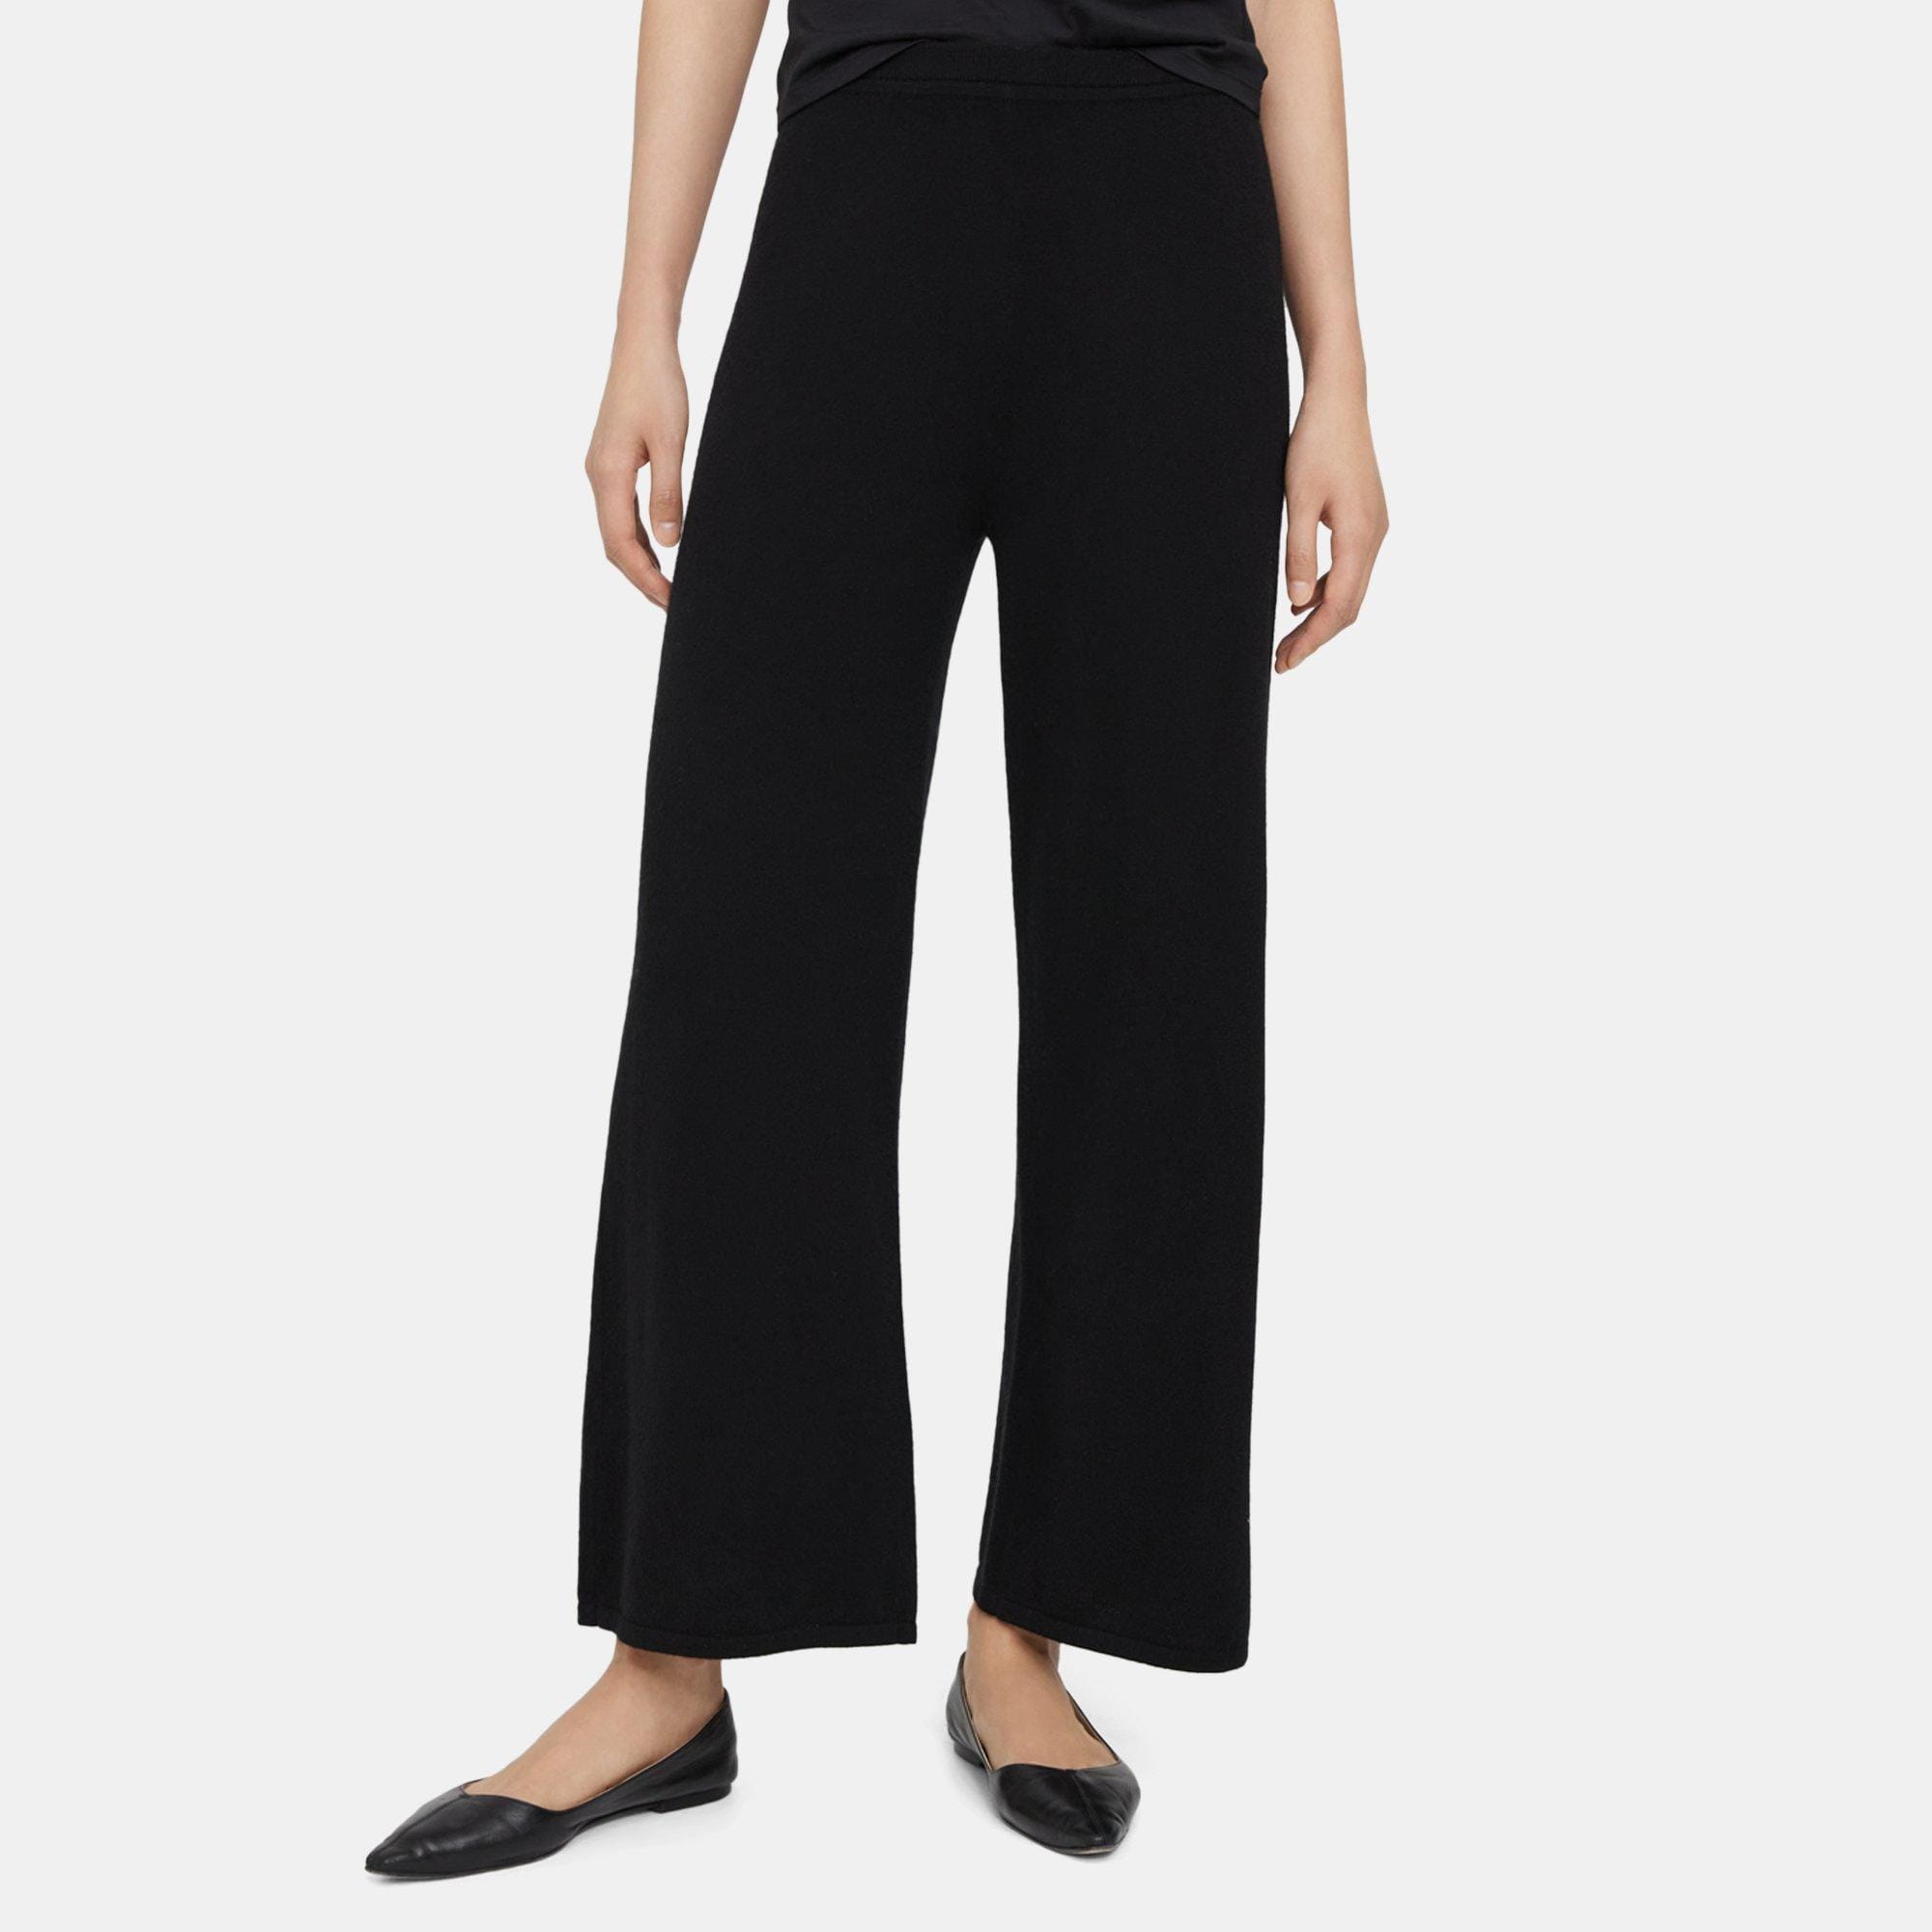 Anona Tall Mid Rise Modal Cashmere Blend Trousers in Black